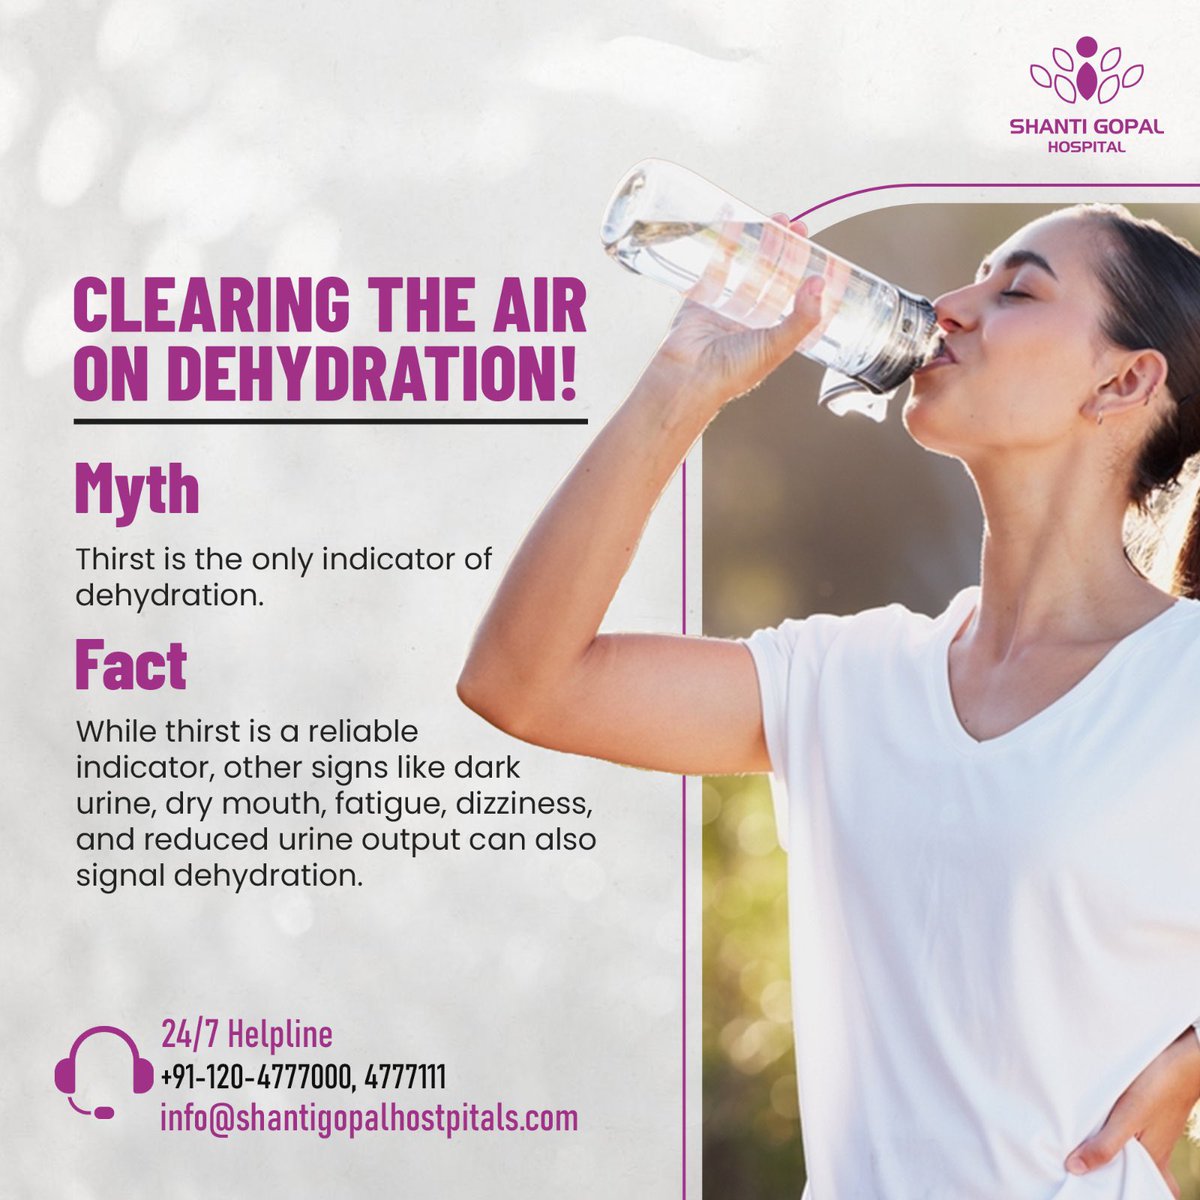 Contrary to popular belief, dehydration isn't solely signaled by thirst. While feeling parched is a key indicator, it's not the only one. 

 #shantigopalhospital   #doctors #healthcareworkers #summer #stayhydrated #stayhydrated💦 #mythandfact #mythsvsfacts